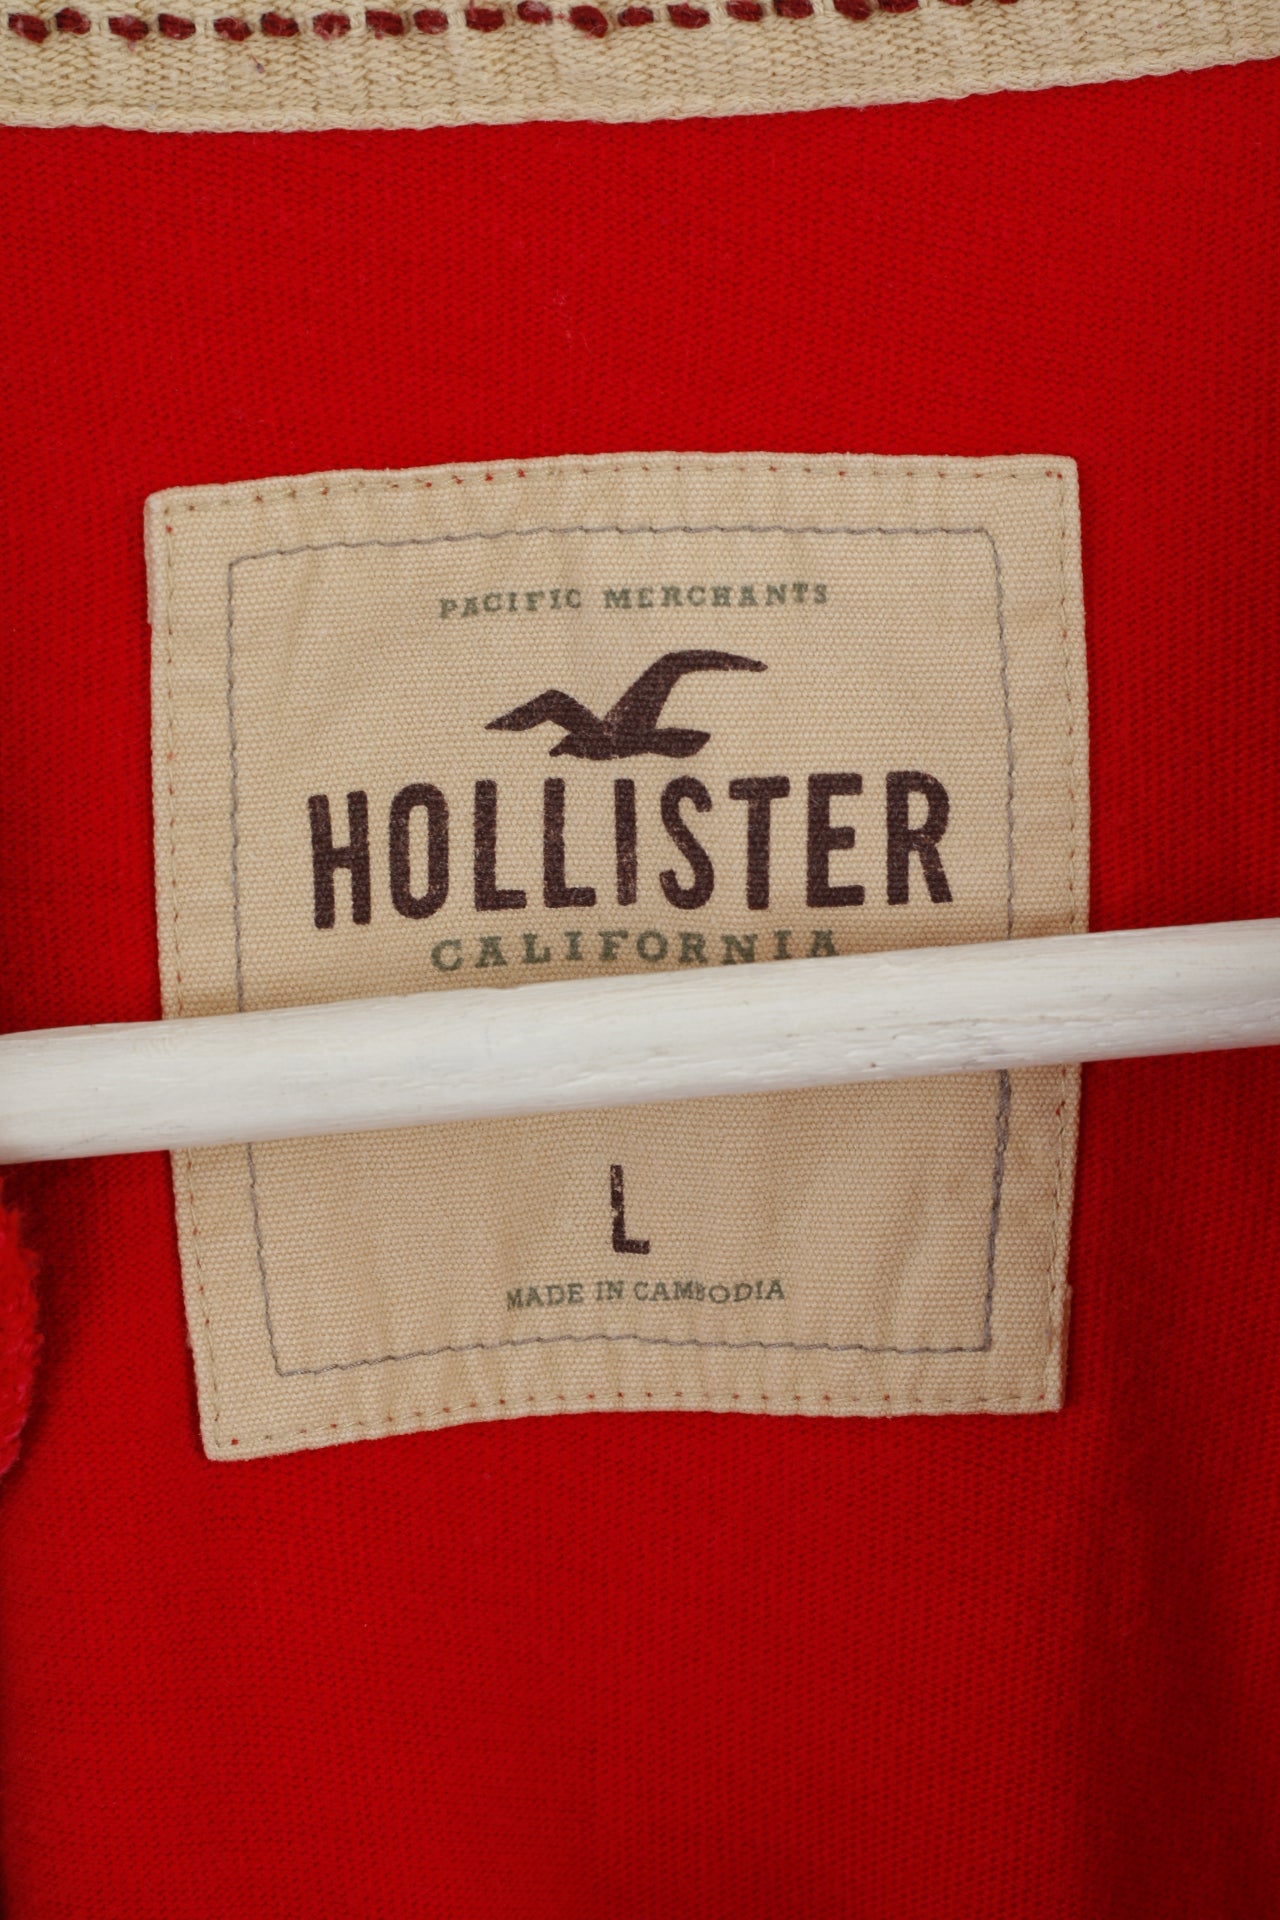 Hollister Men L Long Sleeved Shirt Red Cotton Emroidered Sleeve Casual Top